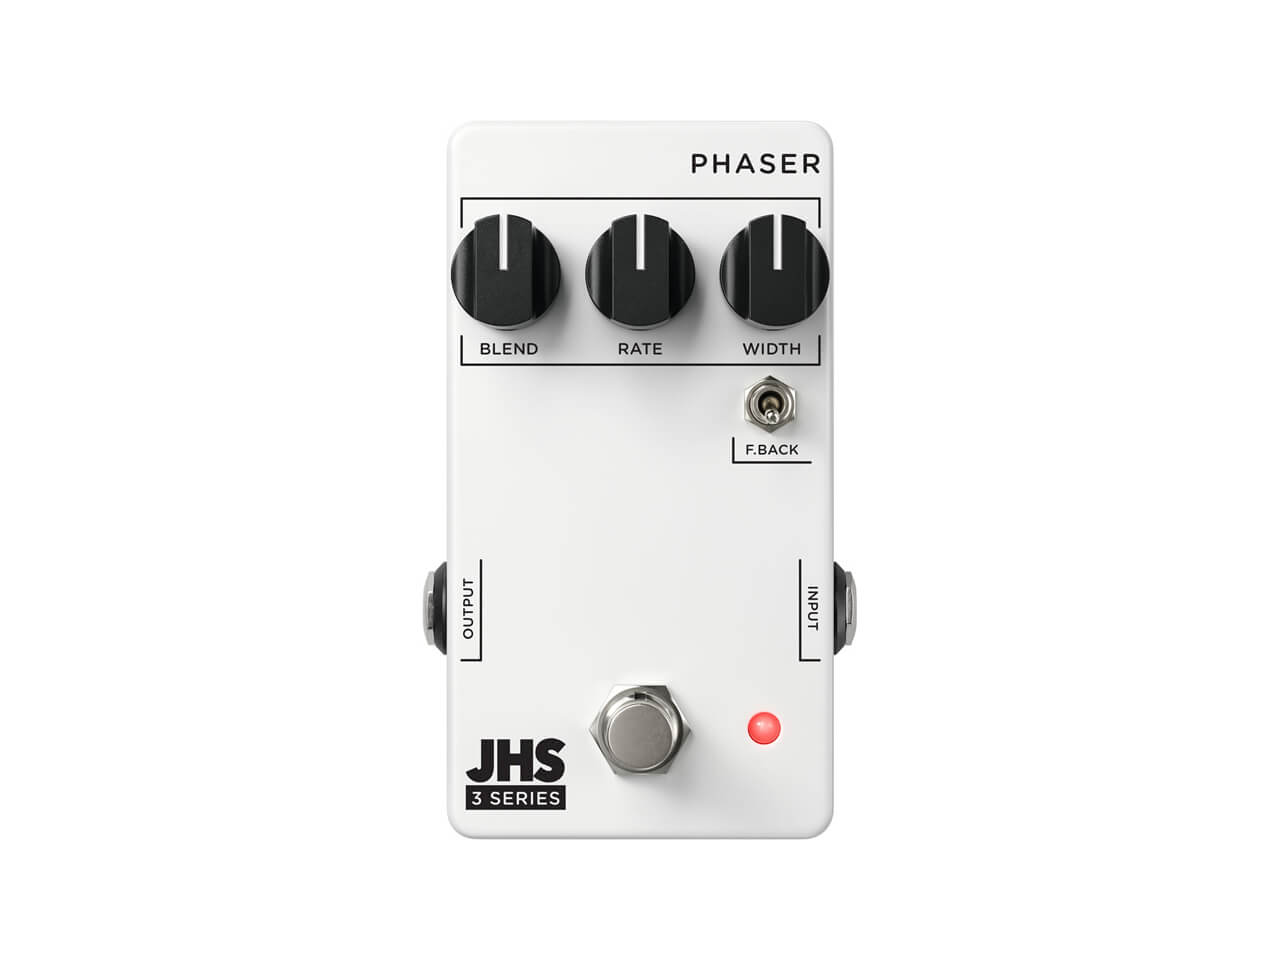 JHS Pedals 3 Series PHASER<br>(フェイザー)(ジェイエイチエスペダルズ) 駅前店